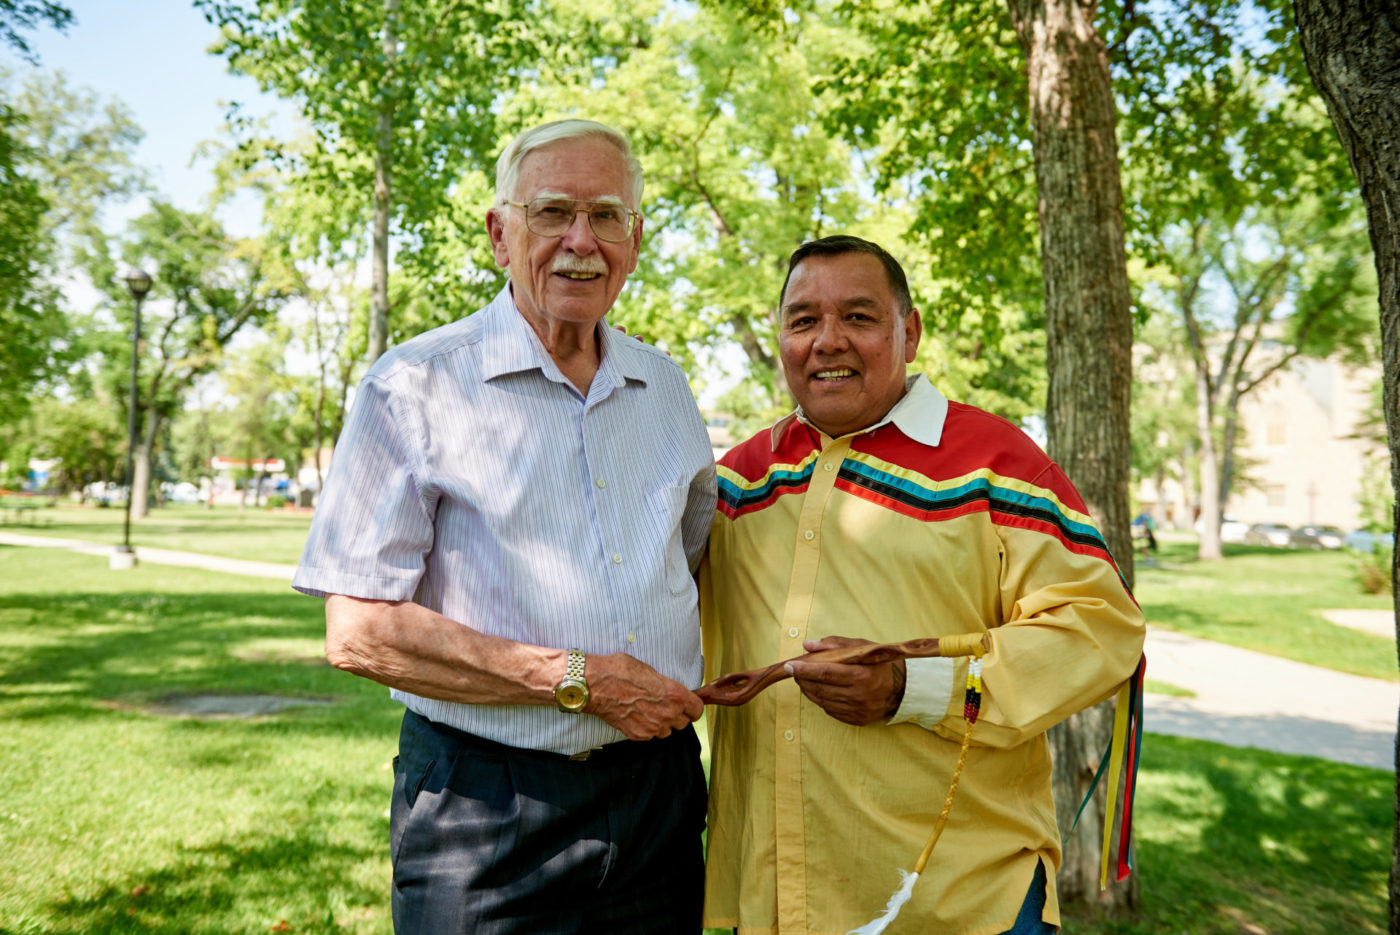 2017 Circles for Reconciliation, supported by the Winnipeg Foundation. Left: Raymond Currie, Project Coordinator; Right: Clayton Sandy, Indigenous Ambassador. Photo: Ian McCausland.